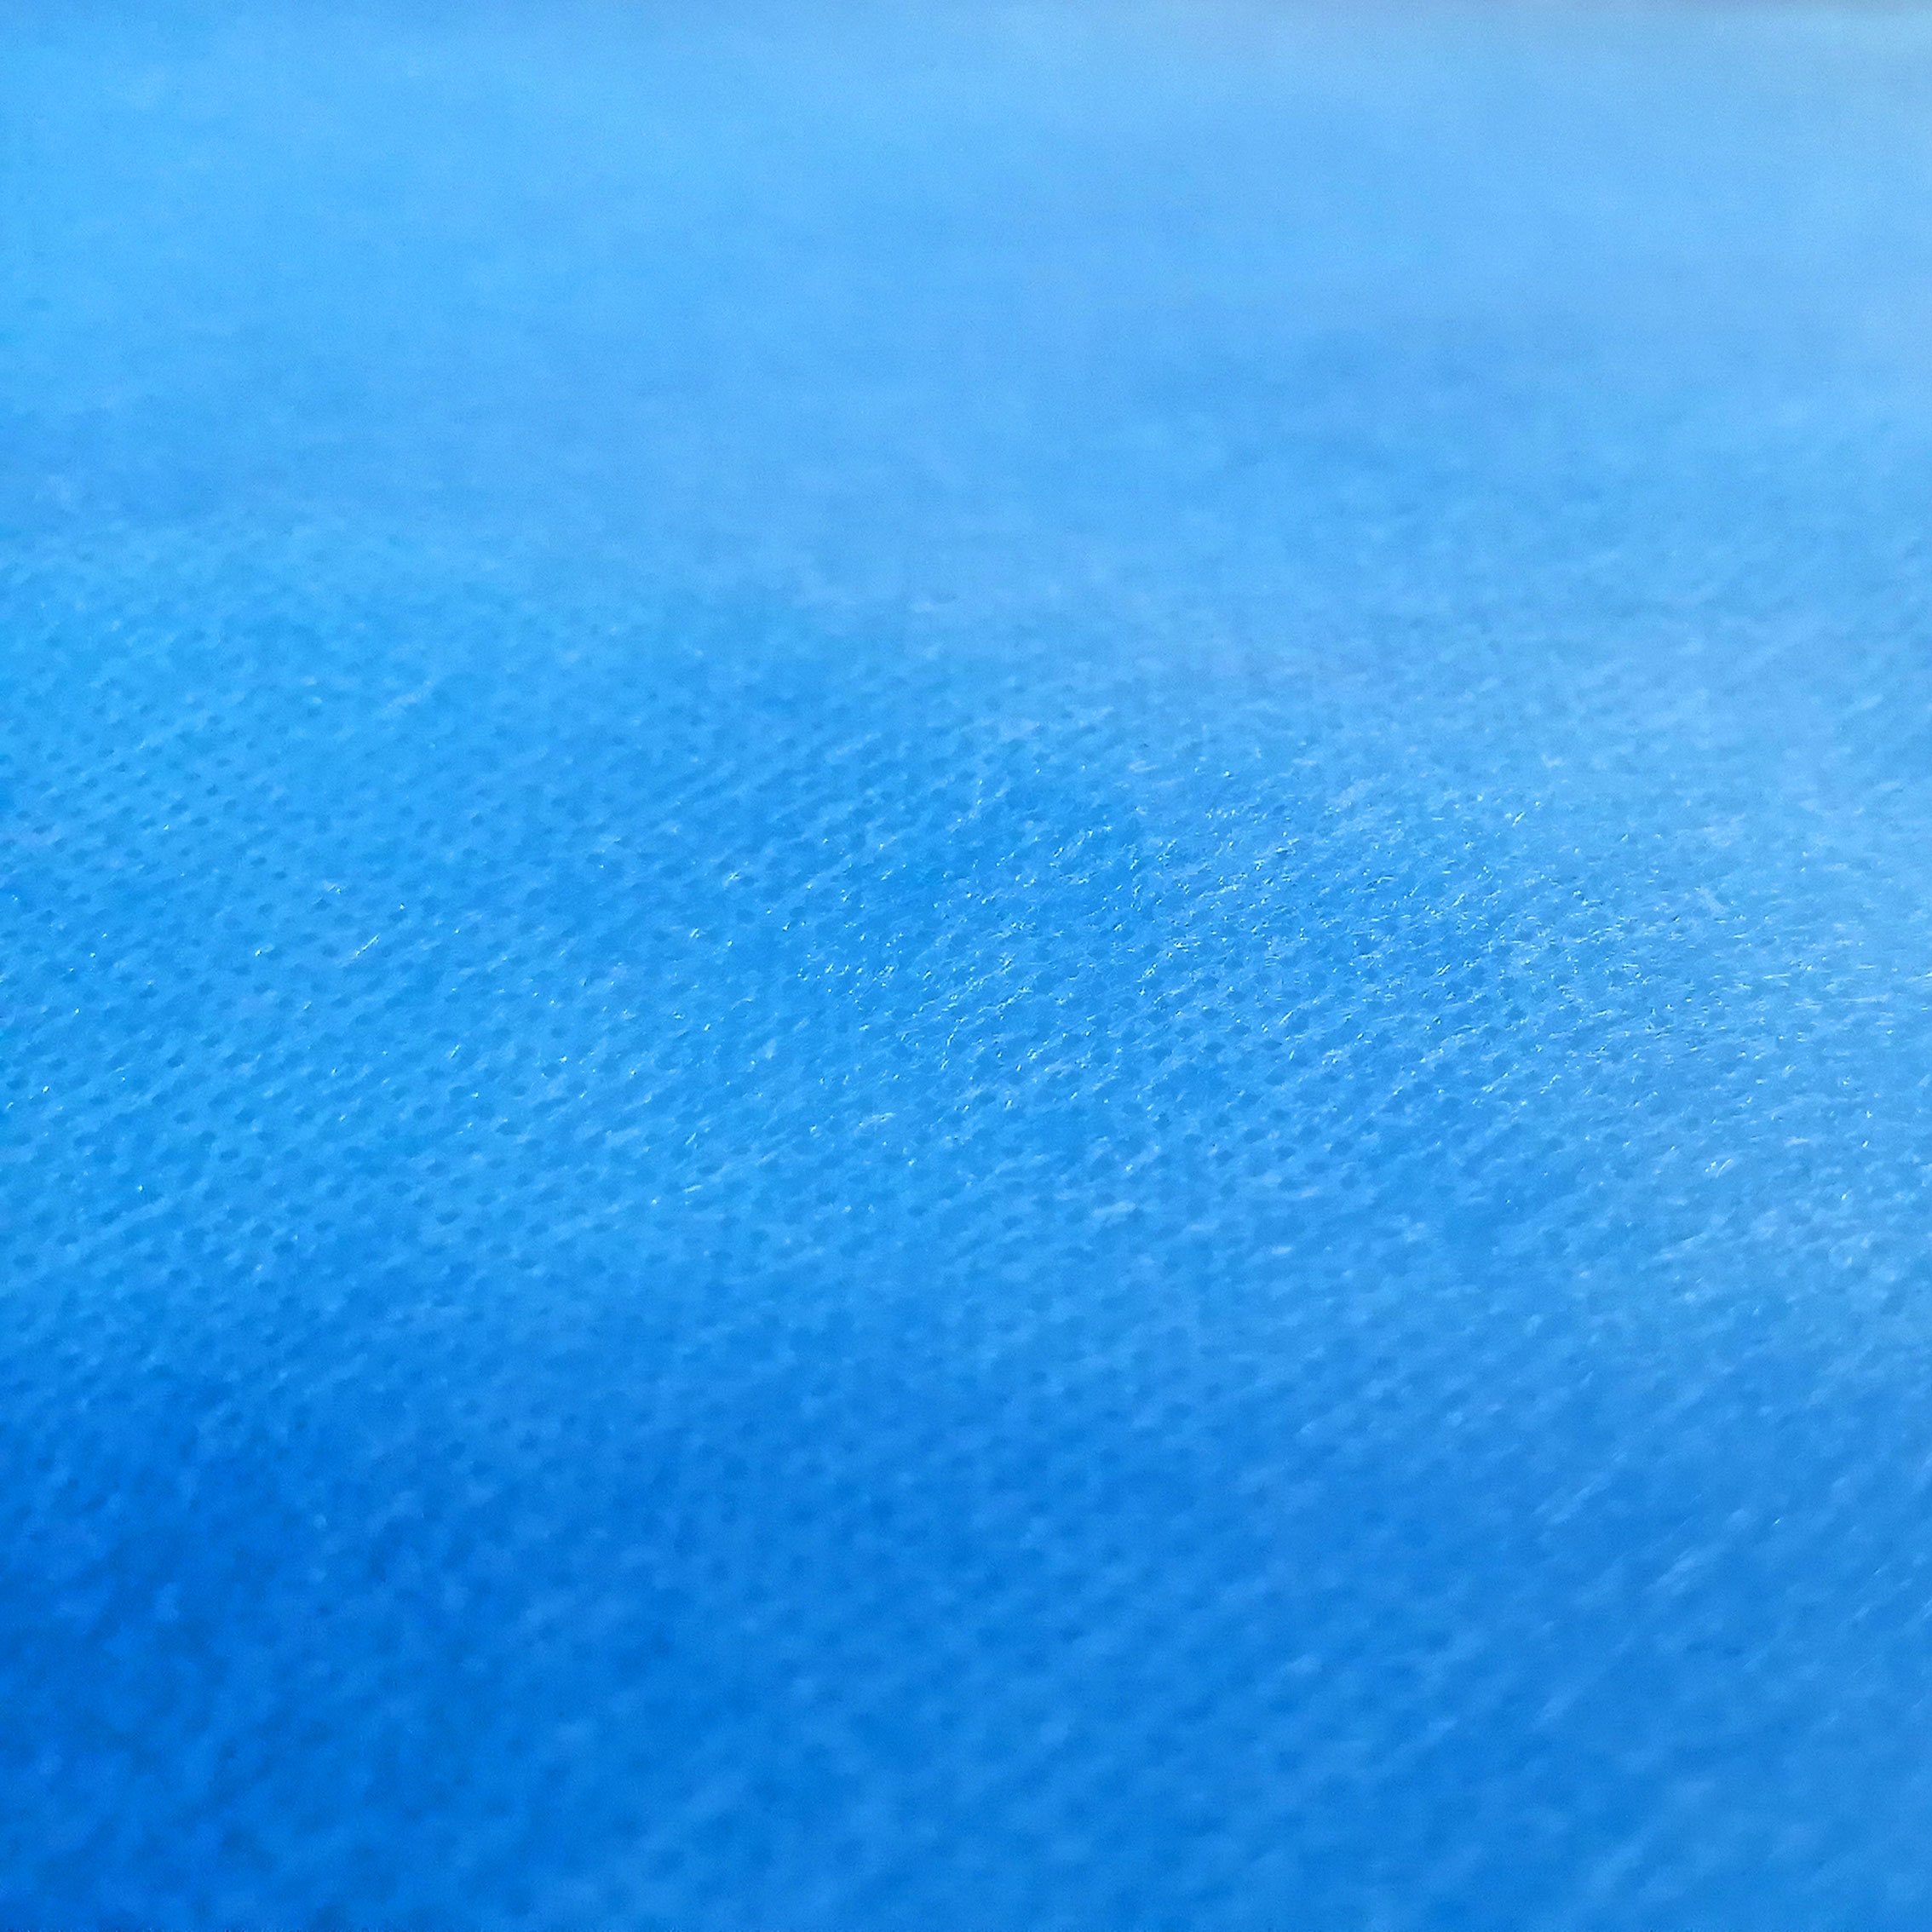 Water resistant non woven meltblown fabric rolls Surgical Face Mask Material used for medical products